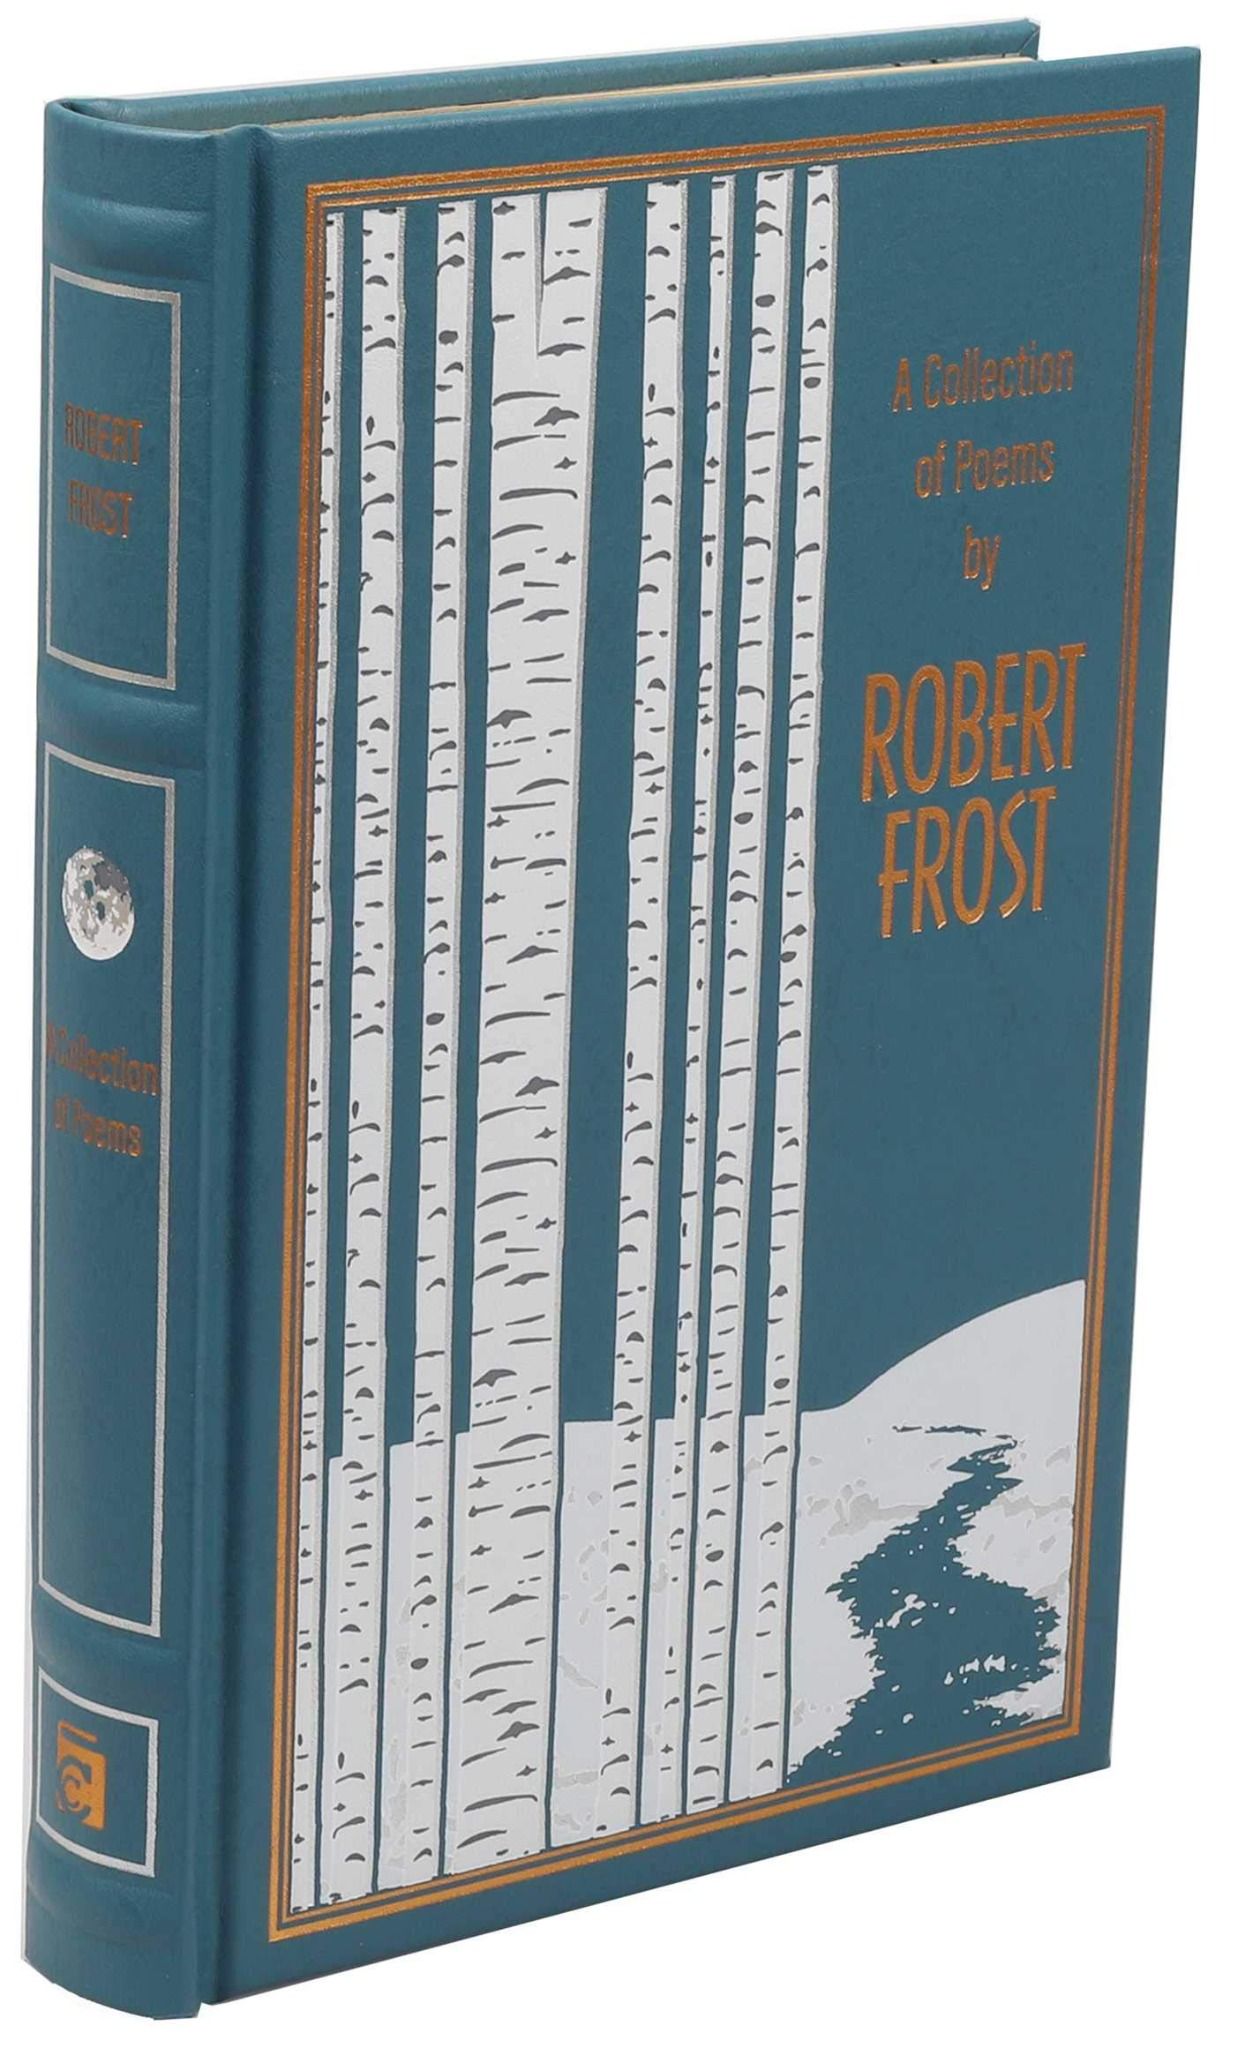  A Collection of Poems by Robert Frost_Robert Frost_9781684126606_Simon & Schuster 